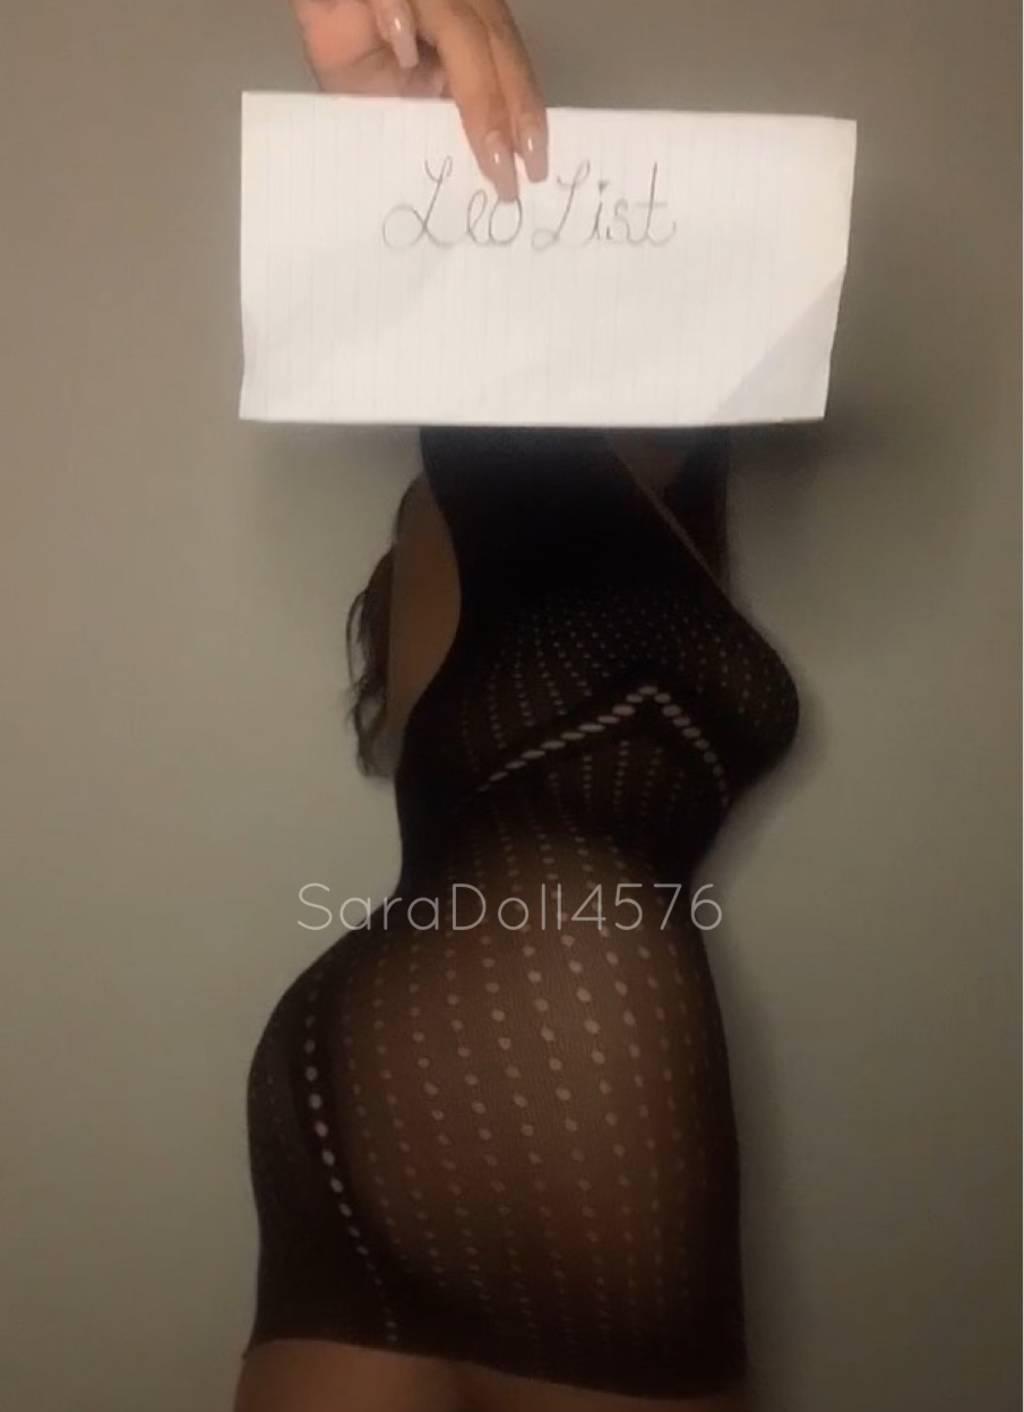 VIDEO CALLS—S3XTING—PICS is Female Escorts. | Peace River Country | British Columbia | Canada | scarletamour.com 